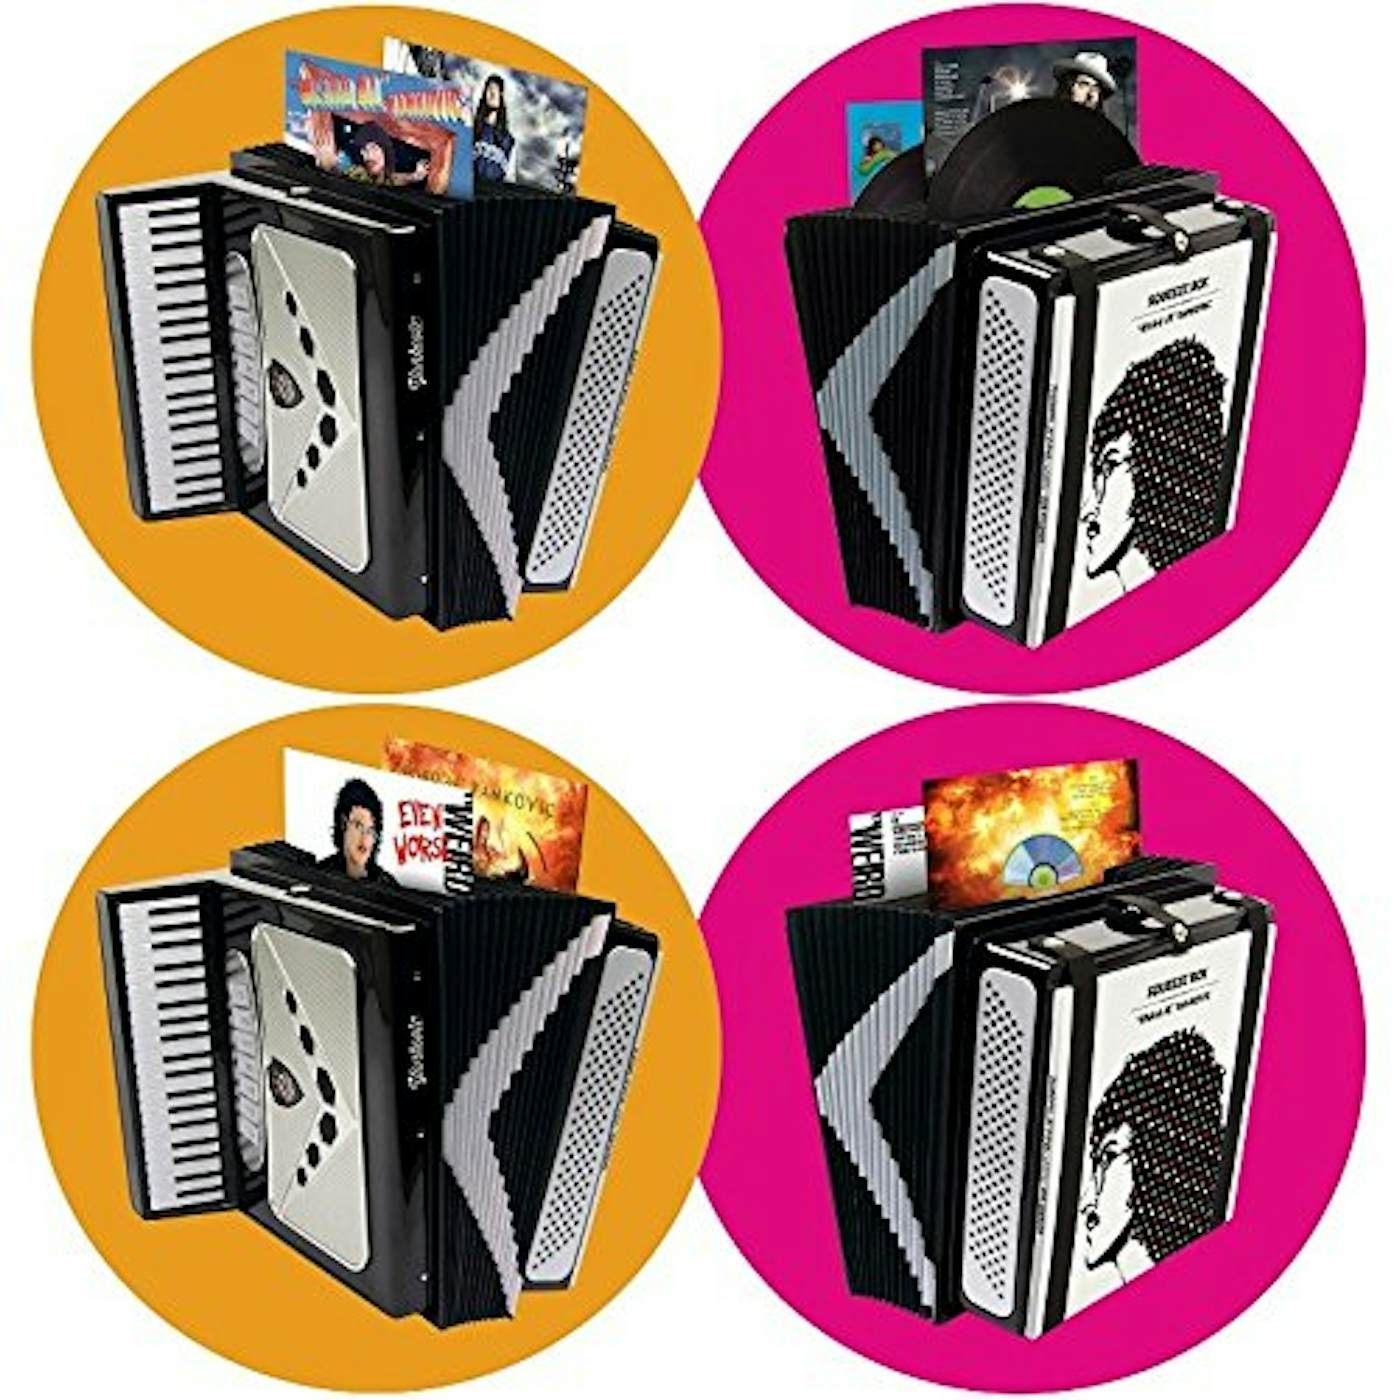 SQUEEZE BOX: COMPLETE WORKS OF "Weird Al" Yankovic CD